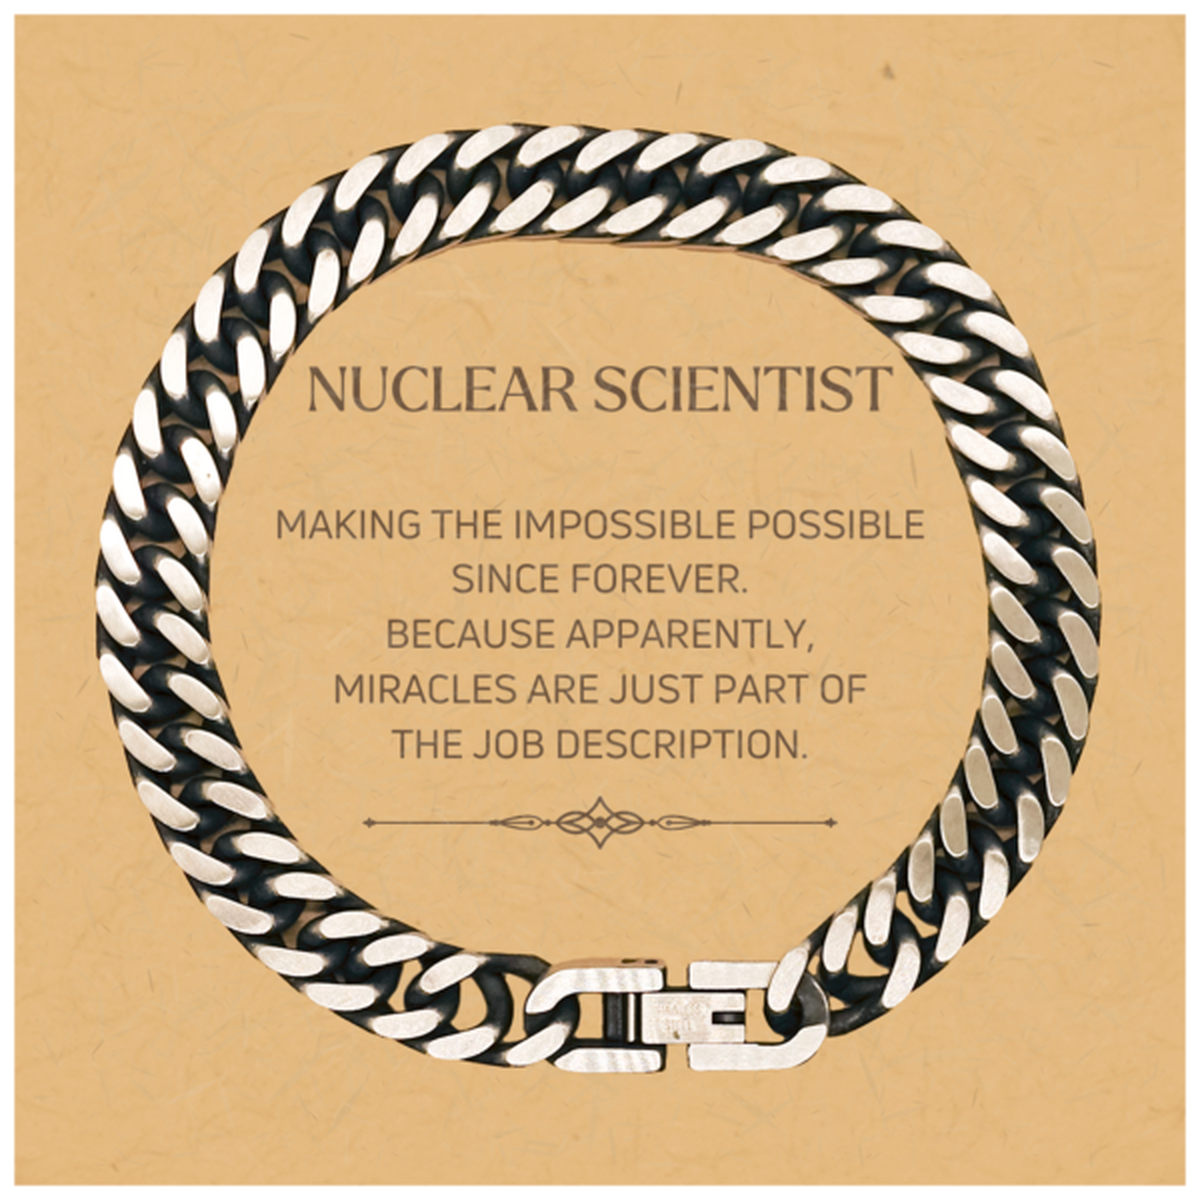 Funny Nuclear Scientist Gifts, Miracles are just part of the job description, Inspirational Birthday Christmas Cuban Link Chain Bracelet For Nuclear Scientist, Men, Women, Coworkers, Friends, Boss